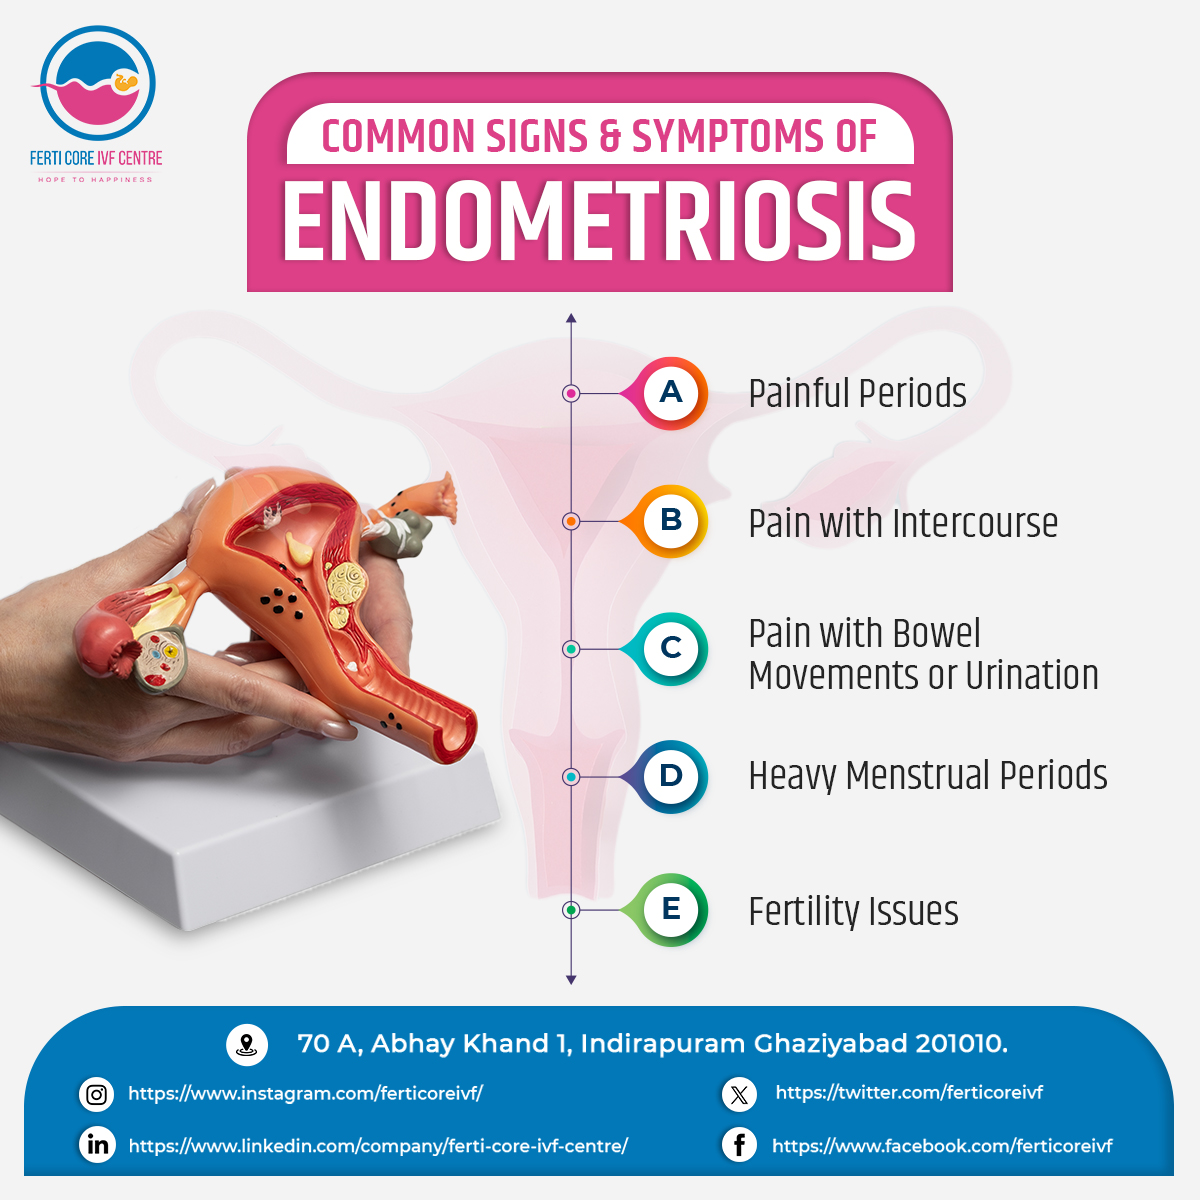 Endometriosis typically develops a few years after menstruation starts. Symptoms may improve during pregnancy and disappear after menopause. If you have these symptoms, book a checkup at +91 97170 45039 or email ferticoreivf@gmail.com.
 #IVF #FertilityClinic #Endometriosis